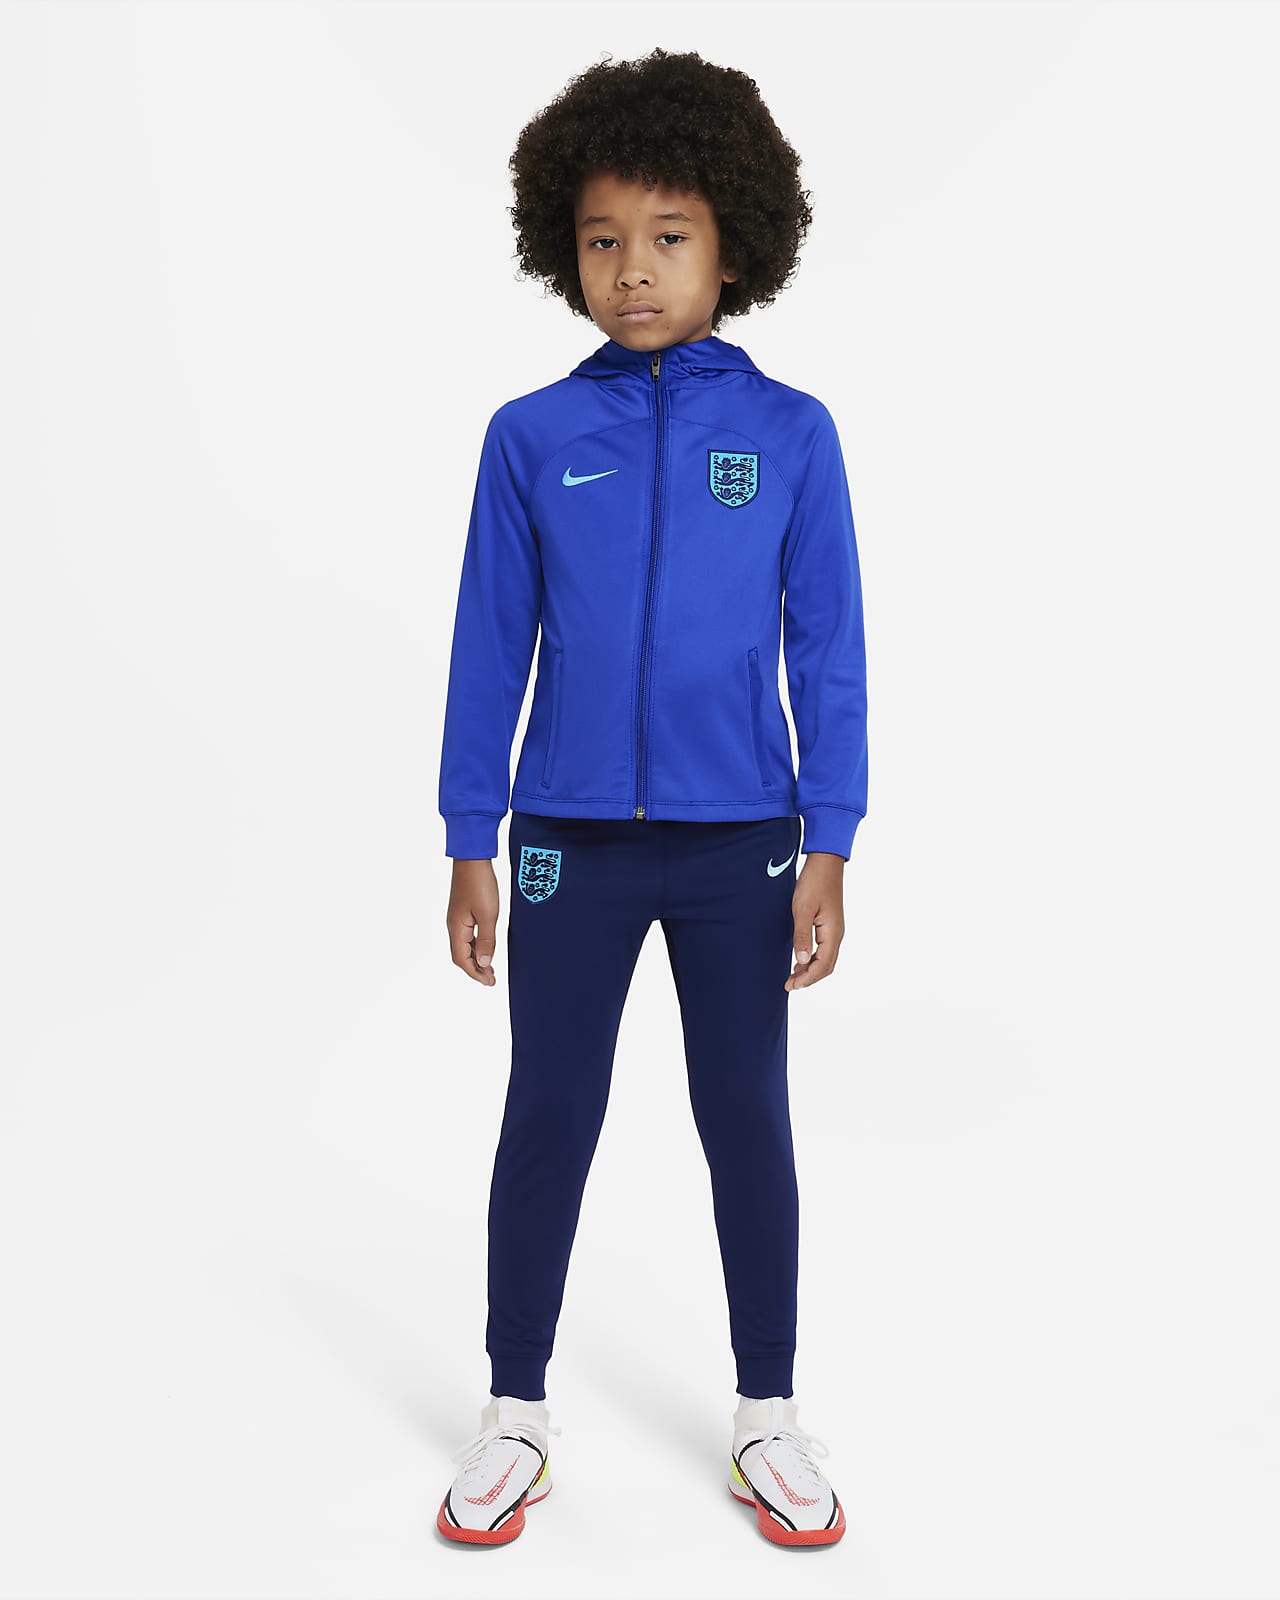 England Strike Younger Kids' Nike Dri-FIT Hooded Football Tracksuit